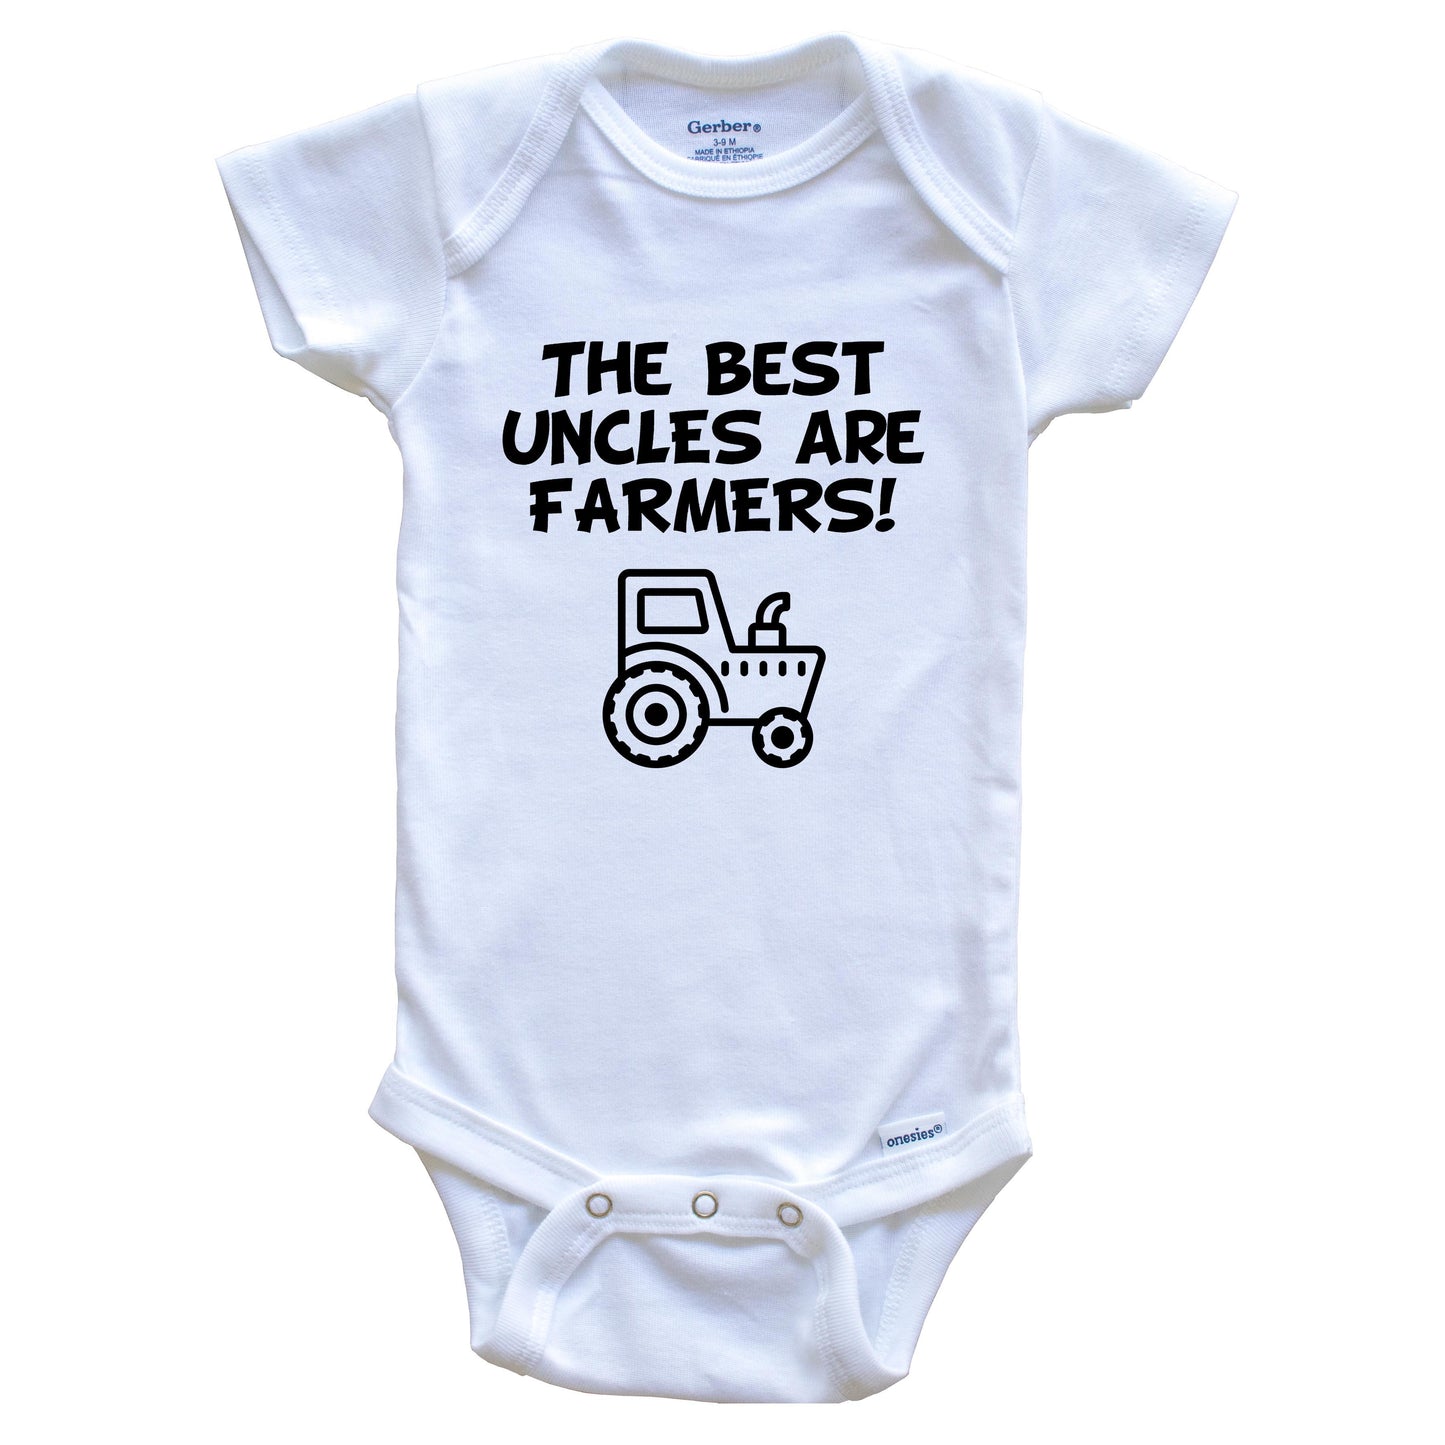 The Best Uncles Are Farmers Funny Niece Nephew Baby Onesie